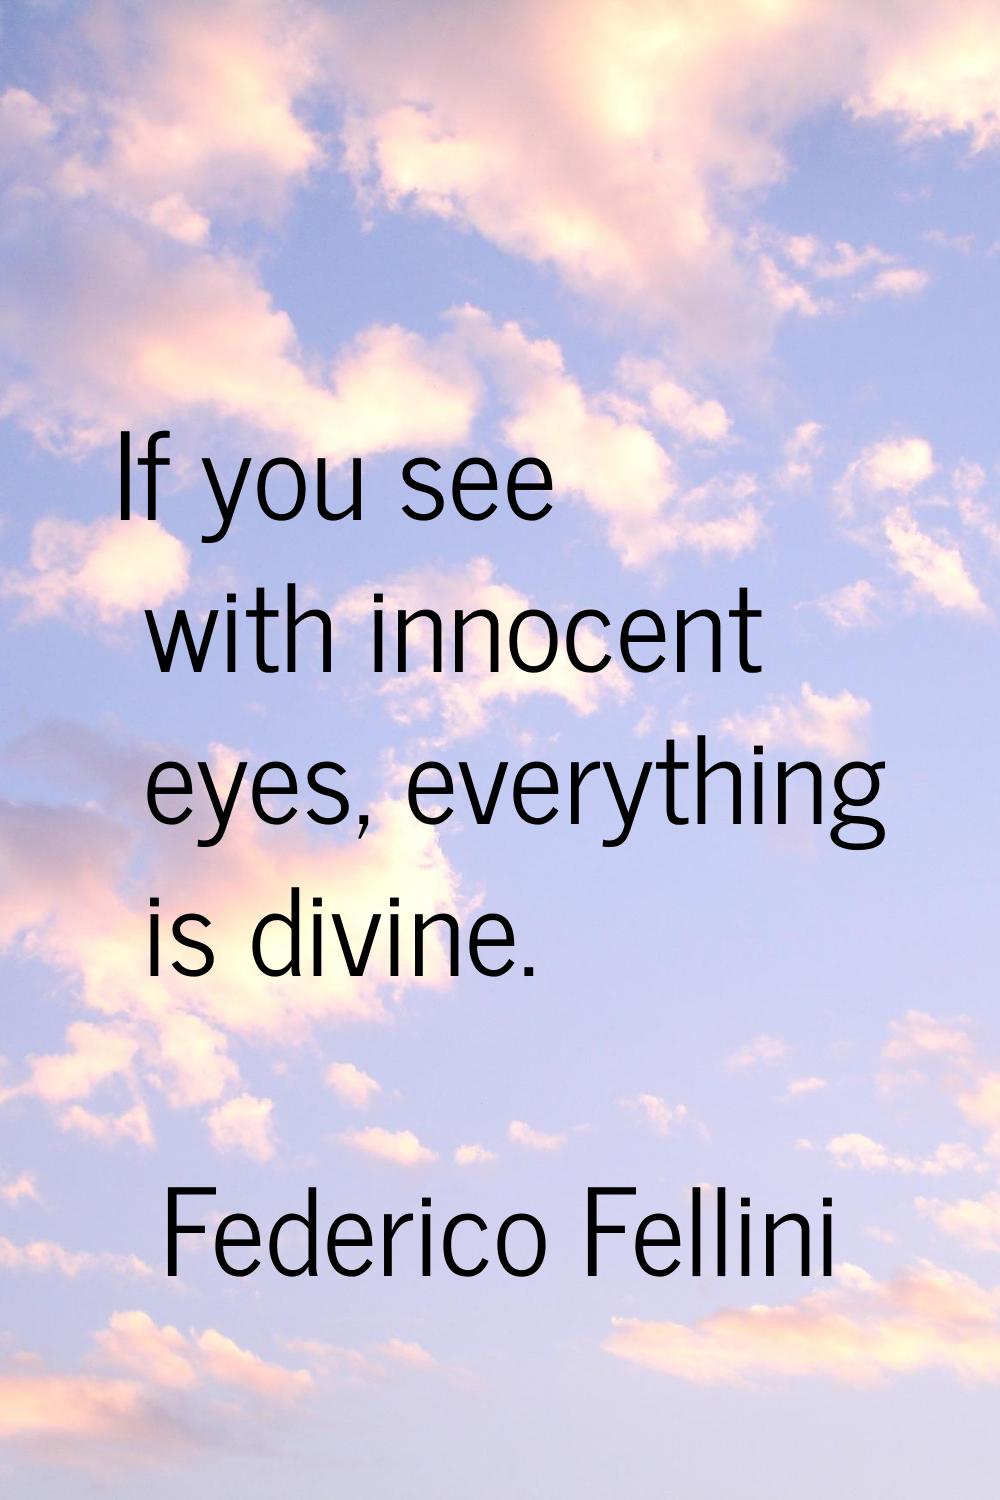 If you see with innocent eyes, everything is divine.